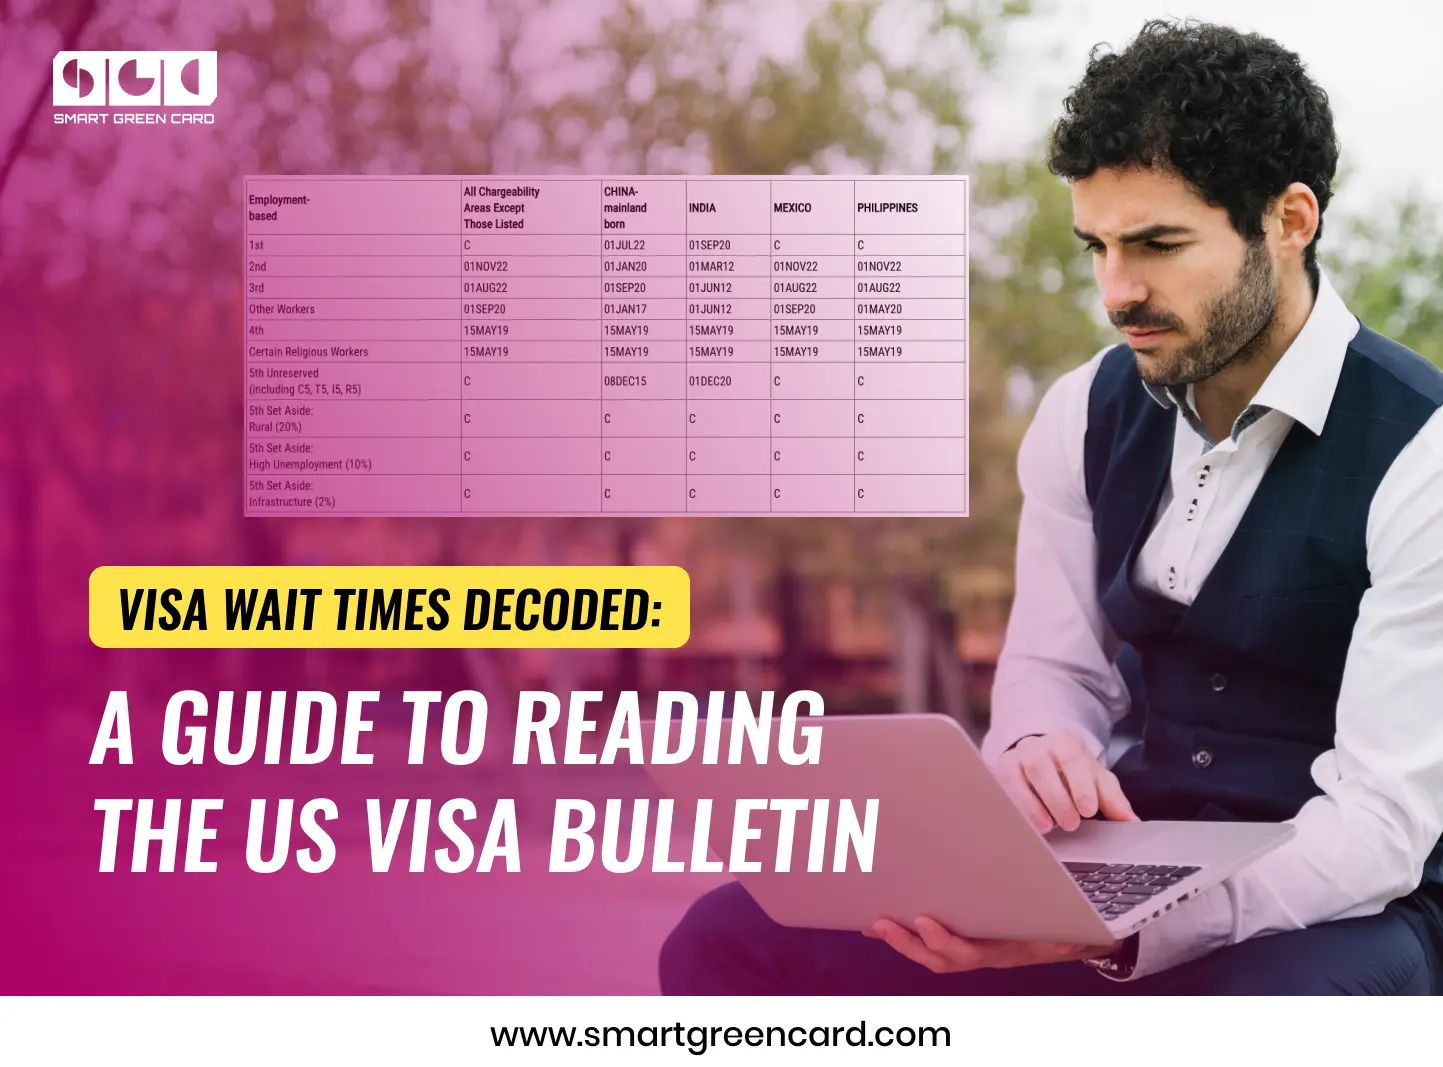 A Guide To Reading the US Visa Bulletin